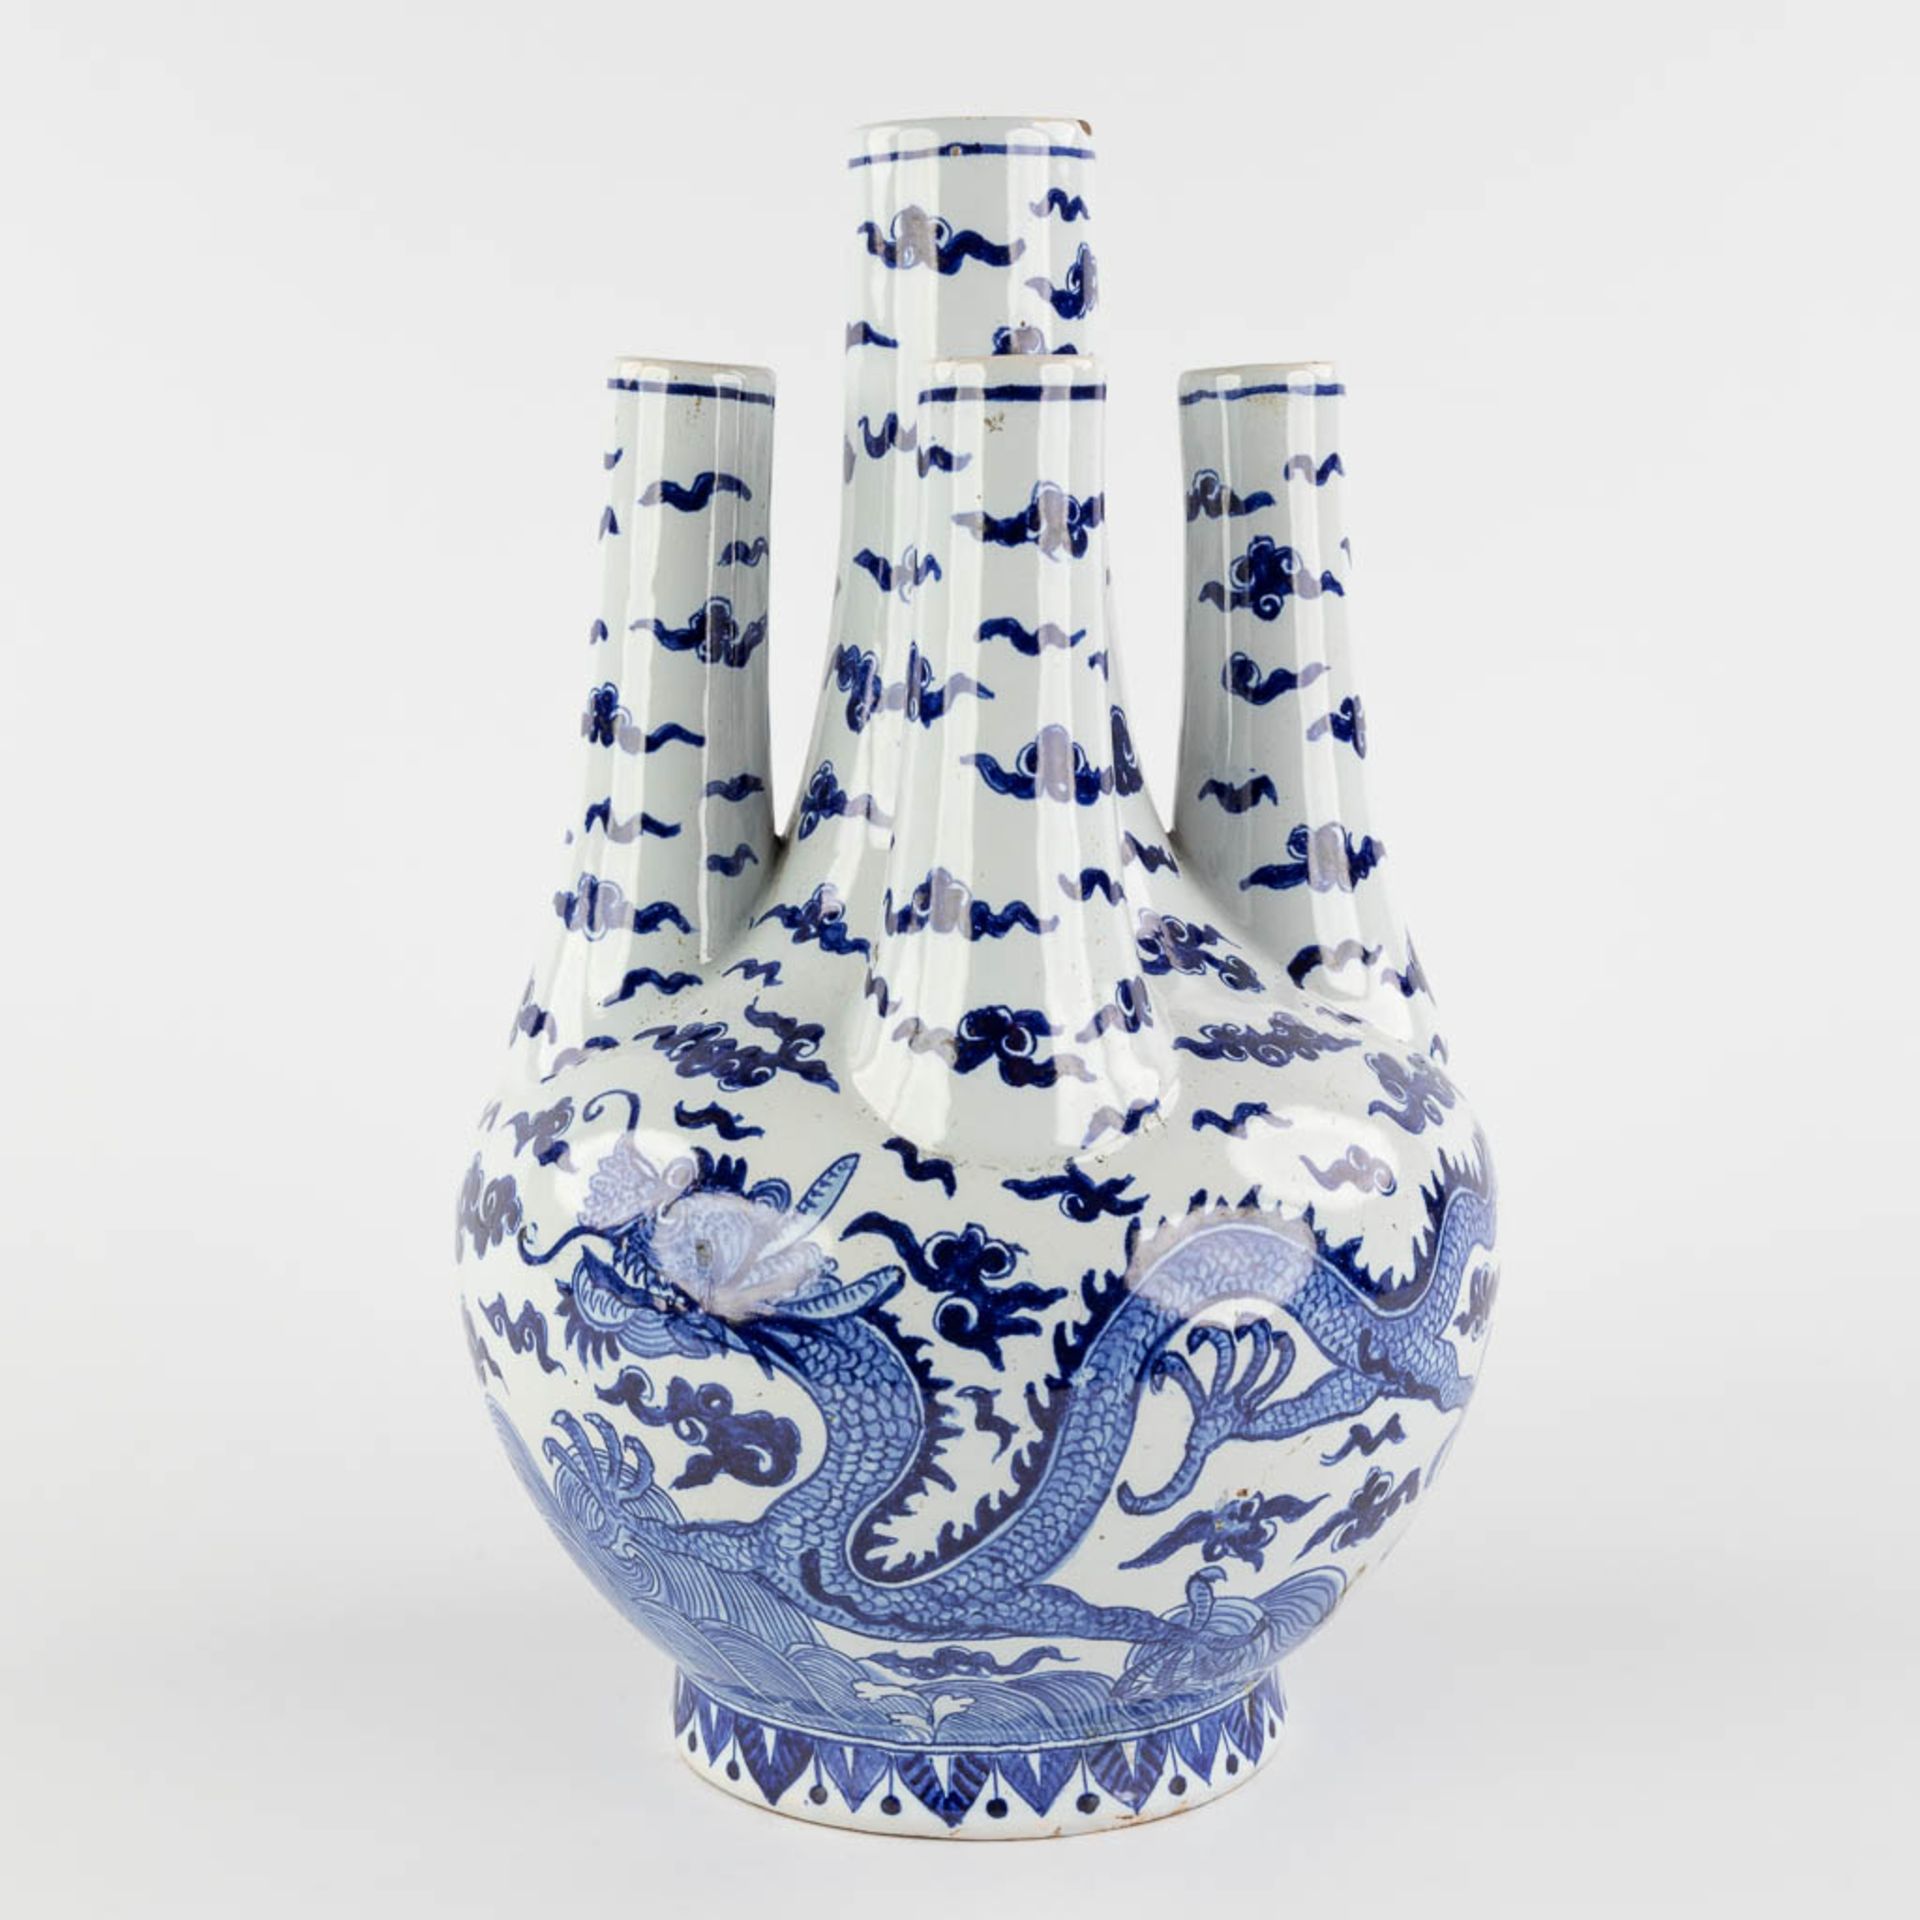 Charles-François Fourmaintraux-Courquin, a tulip vase with Chinoiserie dragon decor France. 19th C. - Image 5 of 15